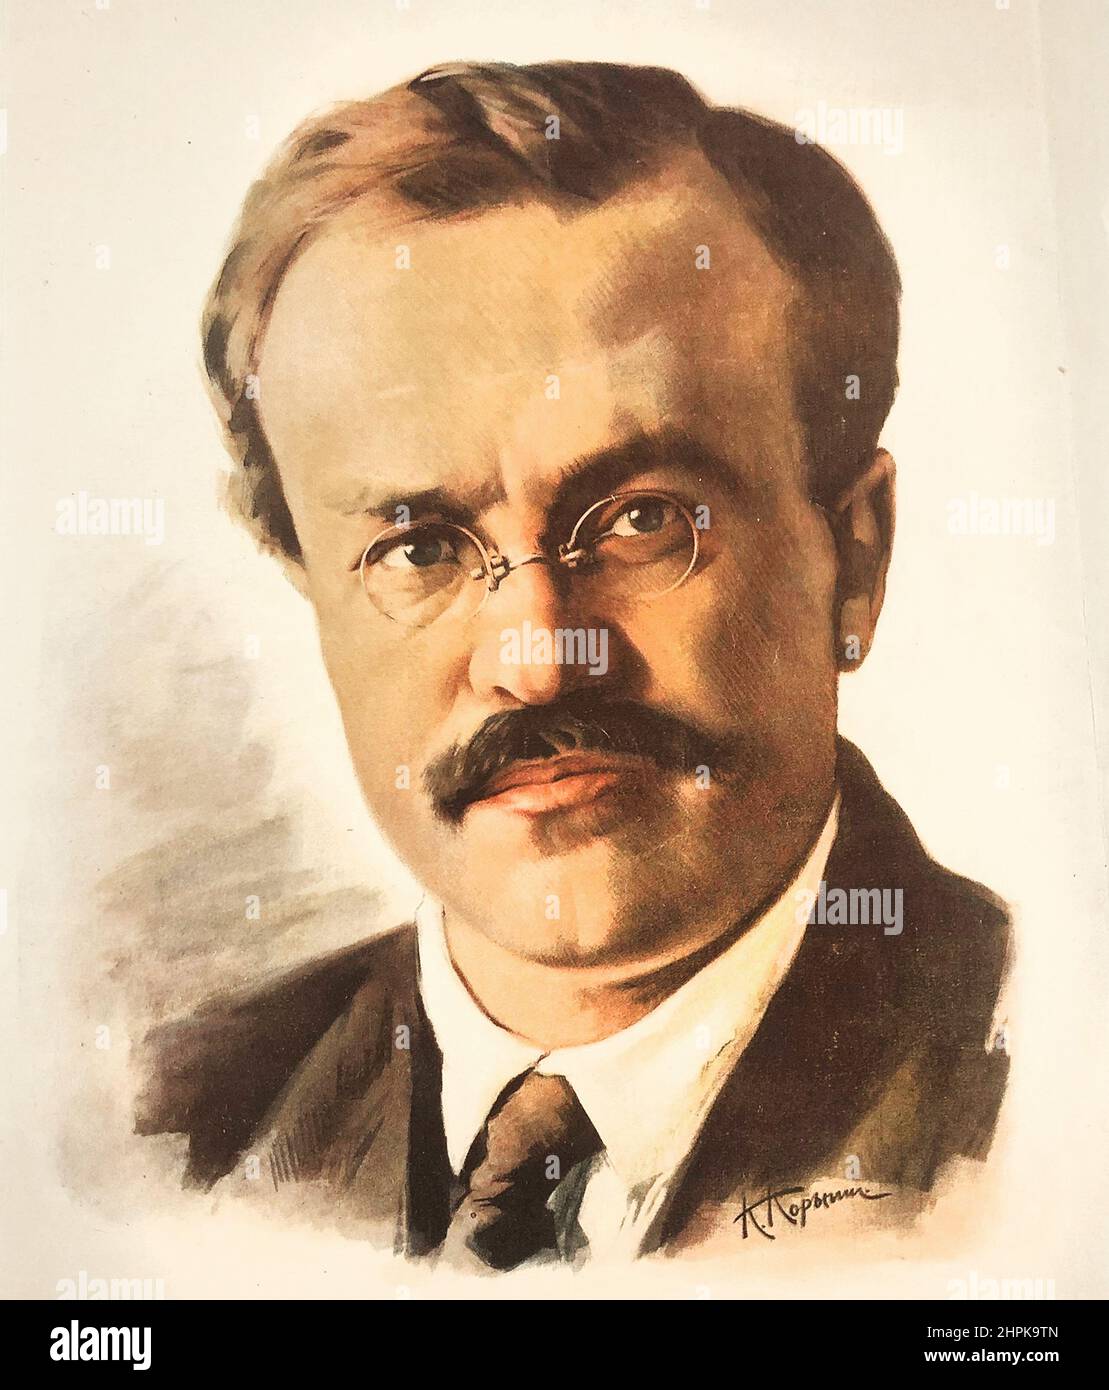 Portrait of Vyacheslav Molotov (1890–1986). He was a Russian politician and diplomat, an Old Bolshevik, and a leading figure in the Soviet government from the 1920s onward. He served as Chairman of the Council of People's Commissars from 1930 to 1941 and as Minister of Foreign Affairs from 1939 to 1949 and from 1953 to 1956. Stock Photo